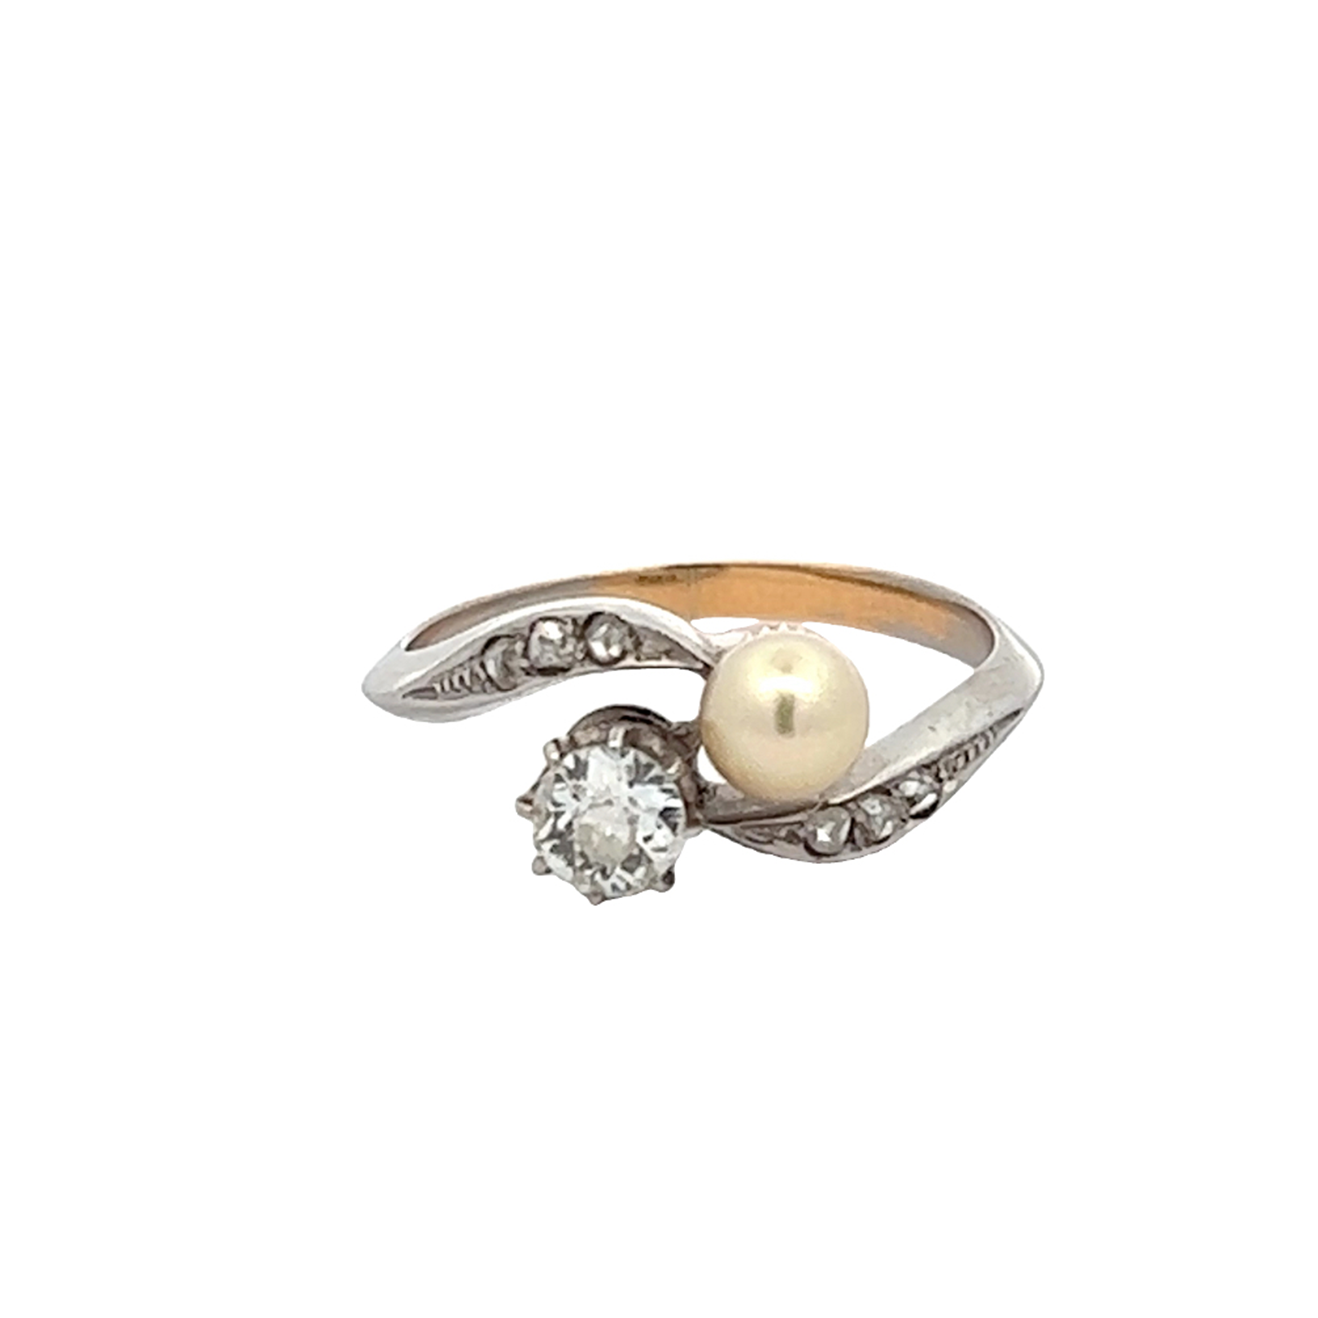 Edwardian Platinum & 18KT Yellow Gold Diamond & Pearl Ring front view